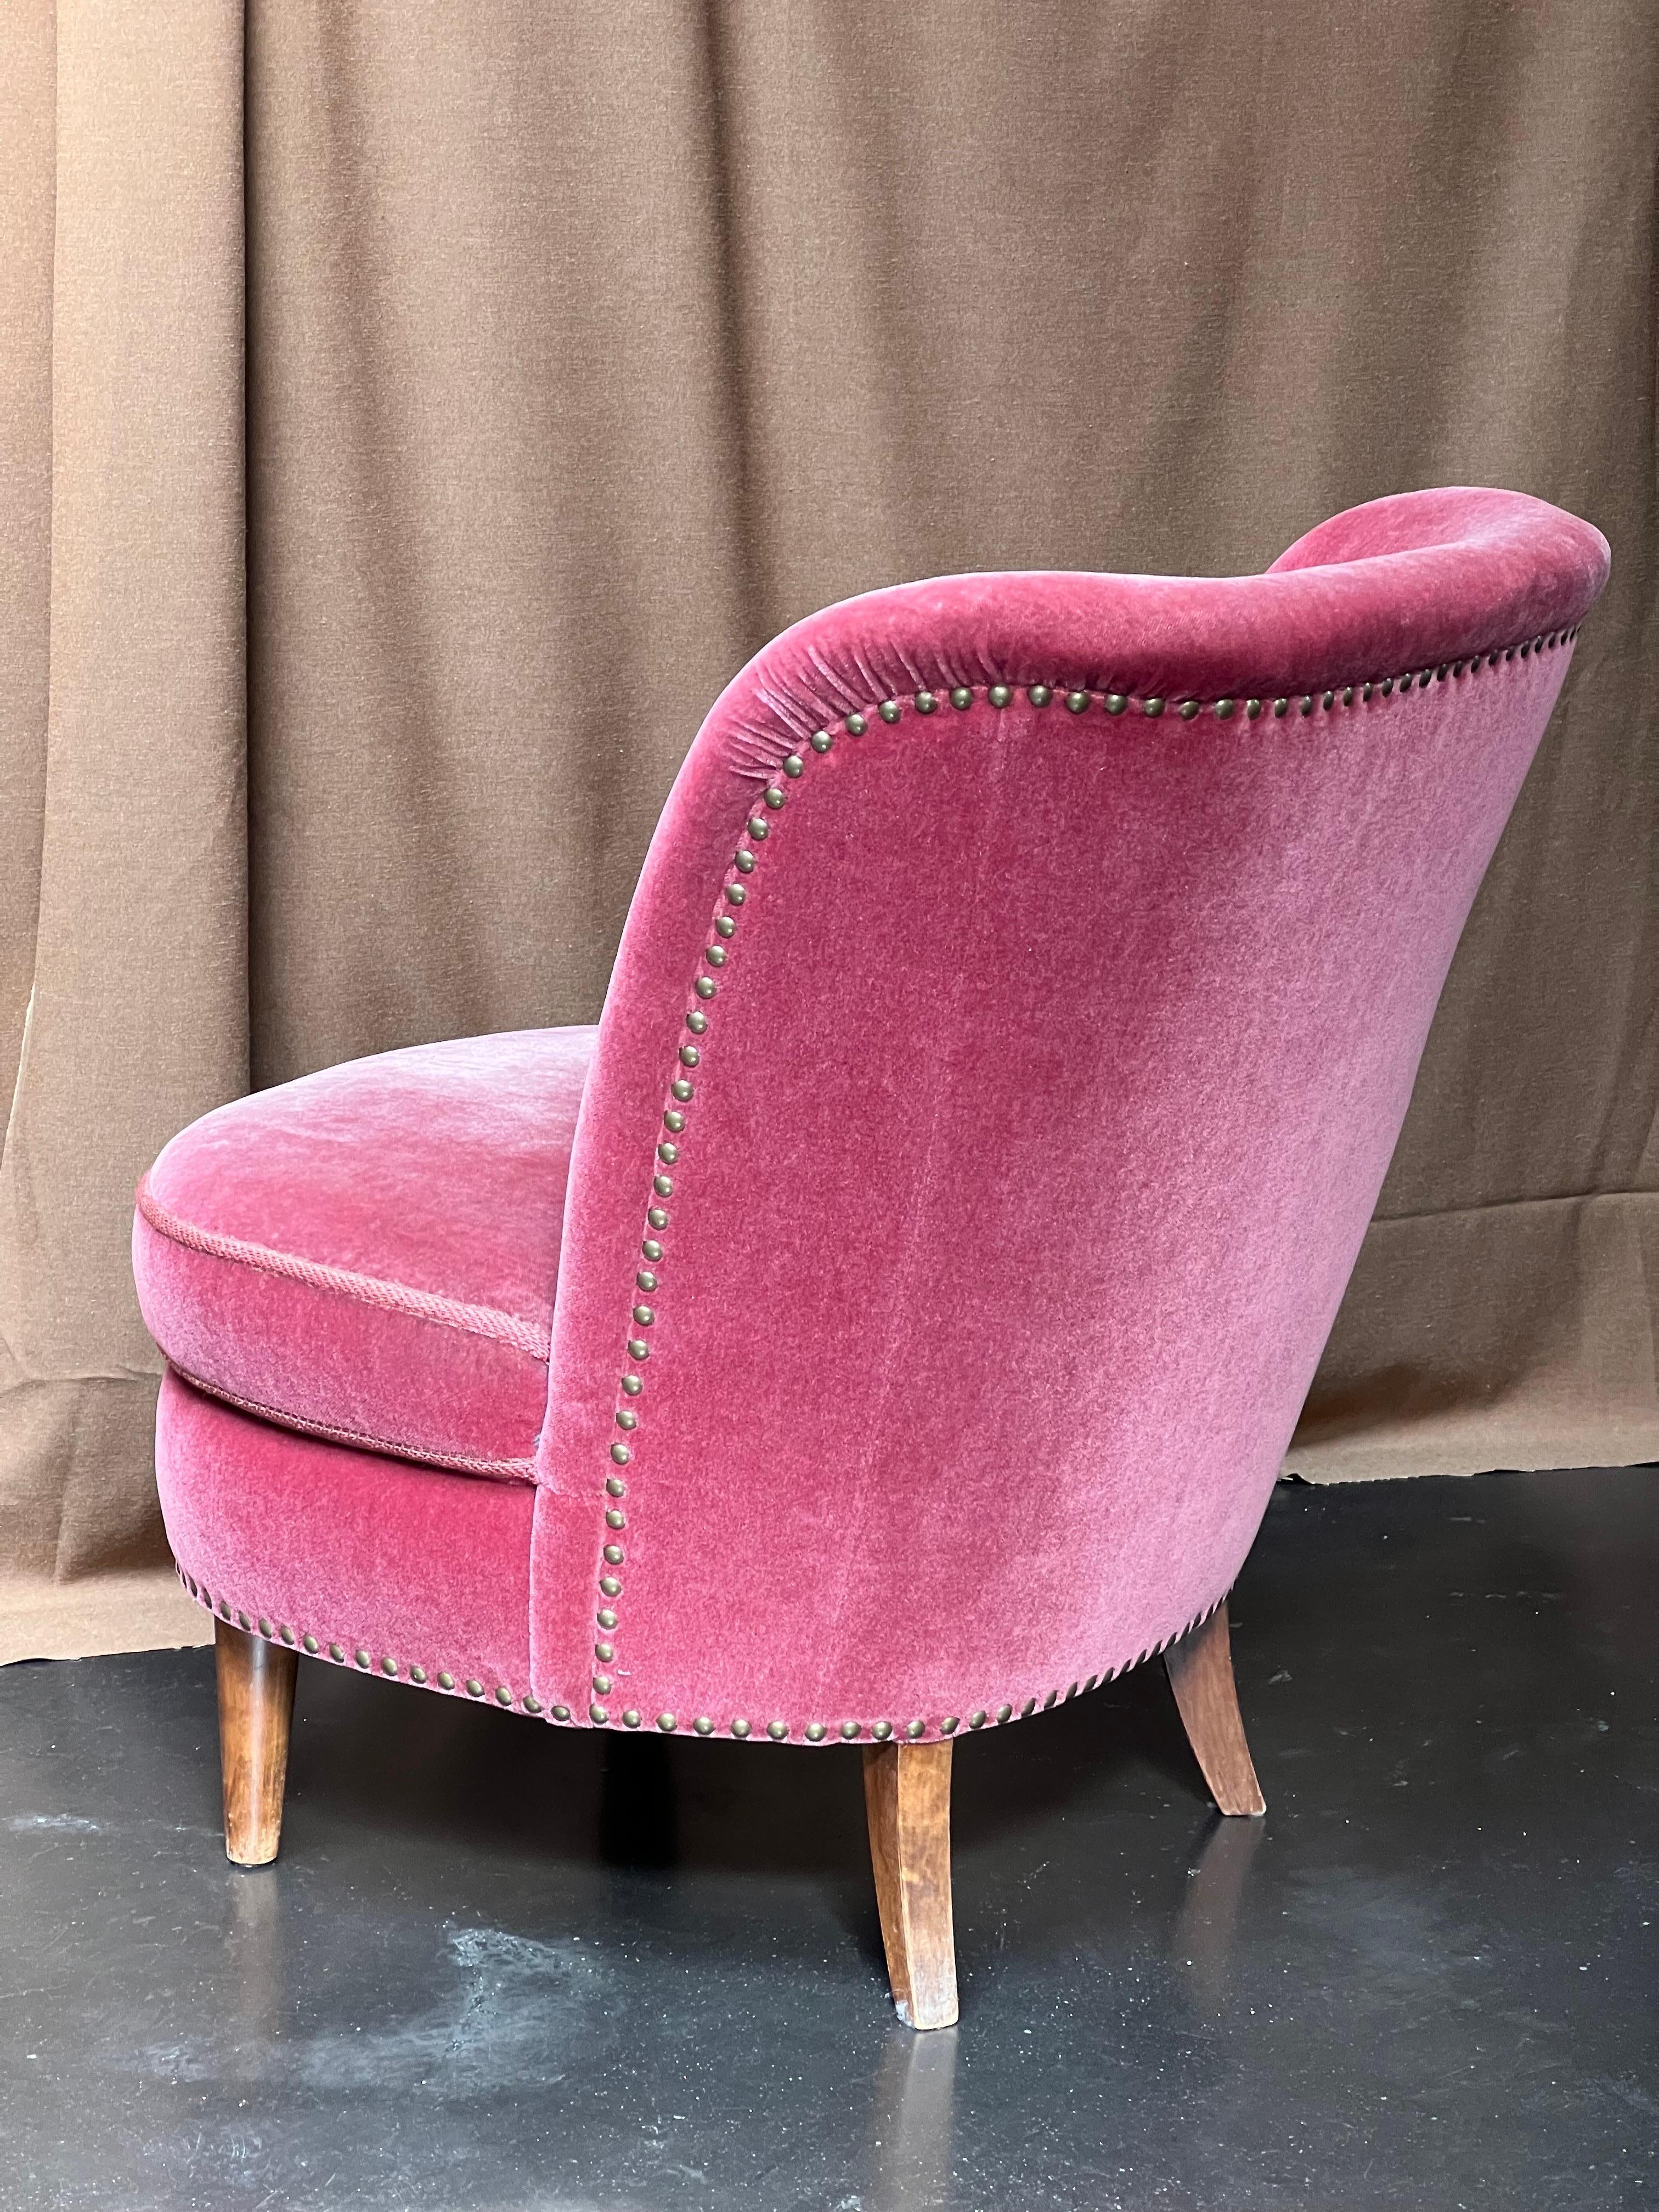 Mid-20th Century Swedish Grace Pink Mohair and Brass Nails Chauffeuse, Sweden, 1930s For Sale